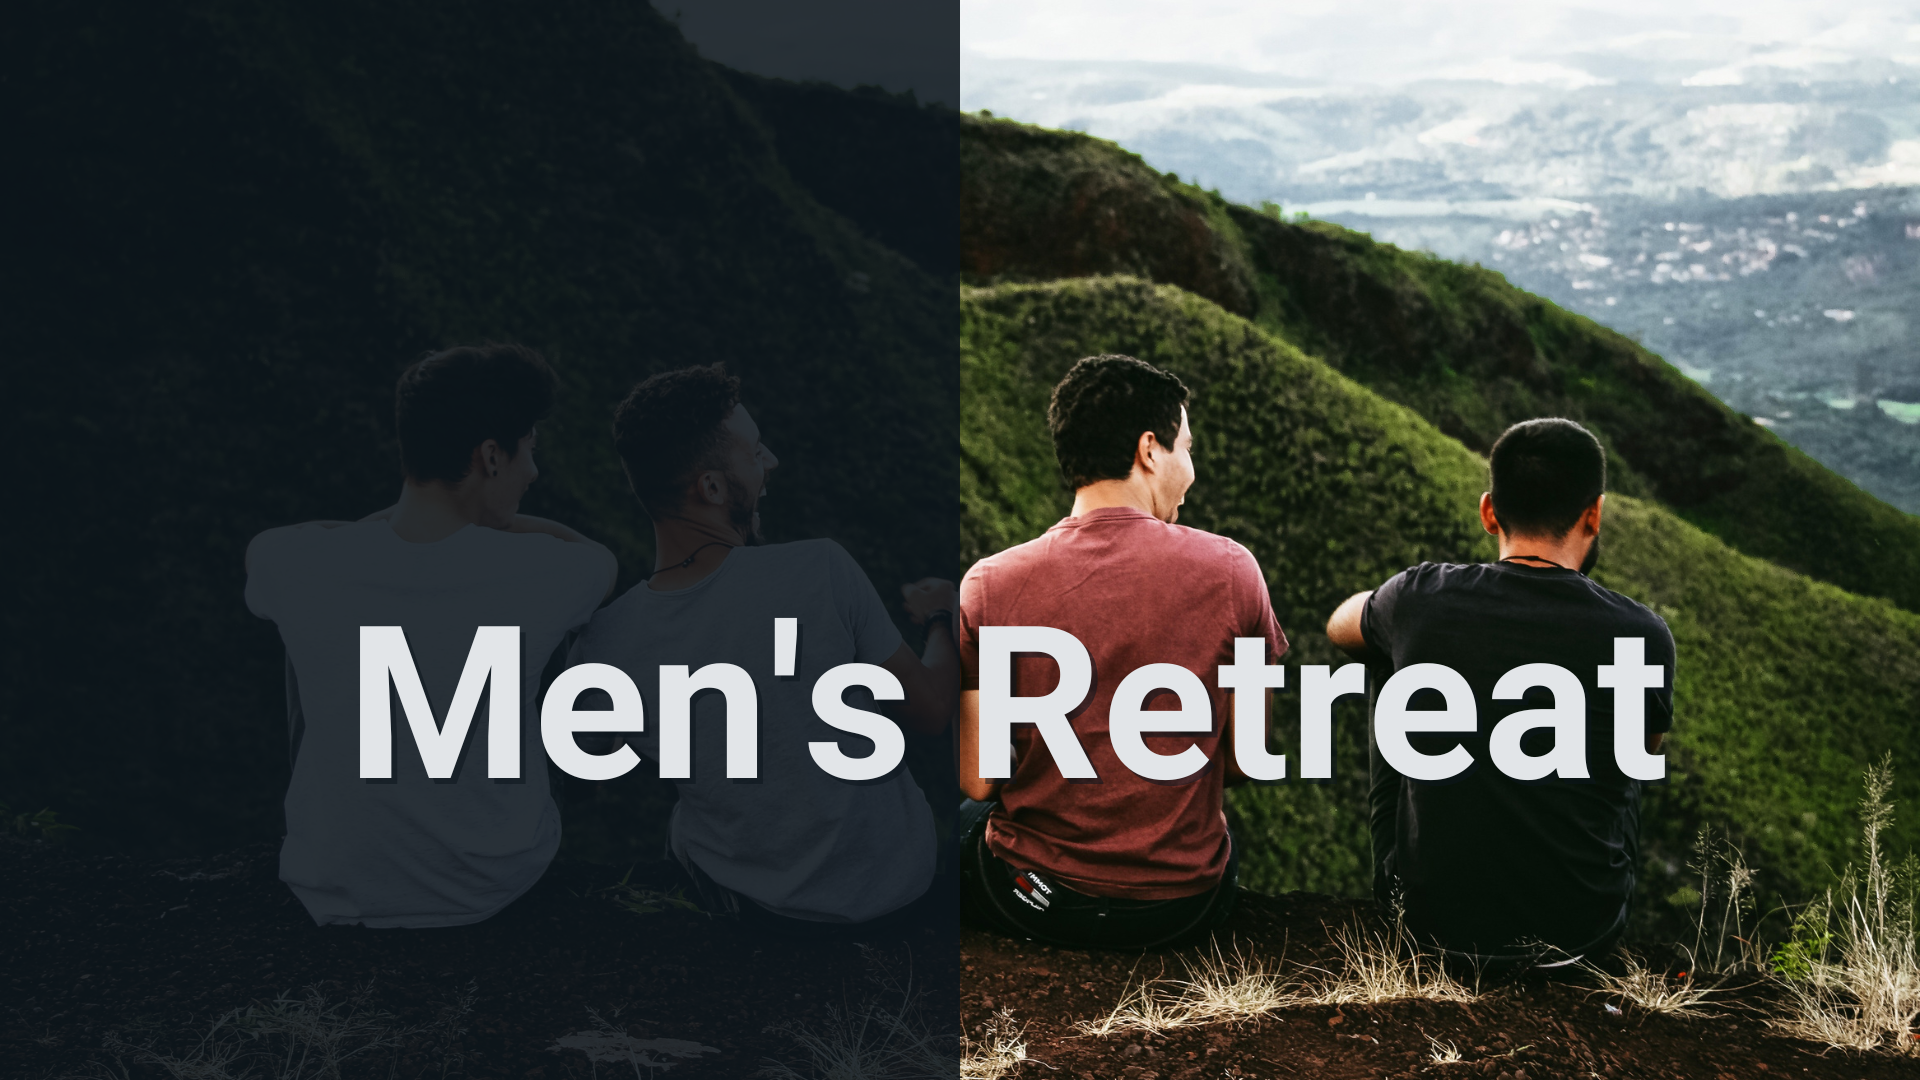 Picture of 4 men from their back, sitting on a hilltop looking over the green hill in front of them and text saying : "Men's Retreat"